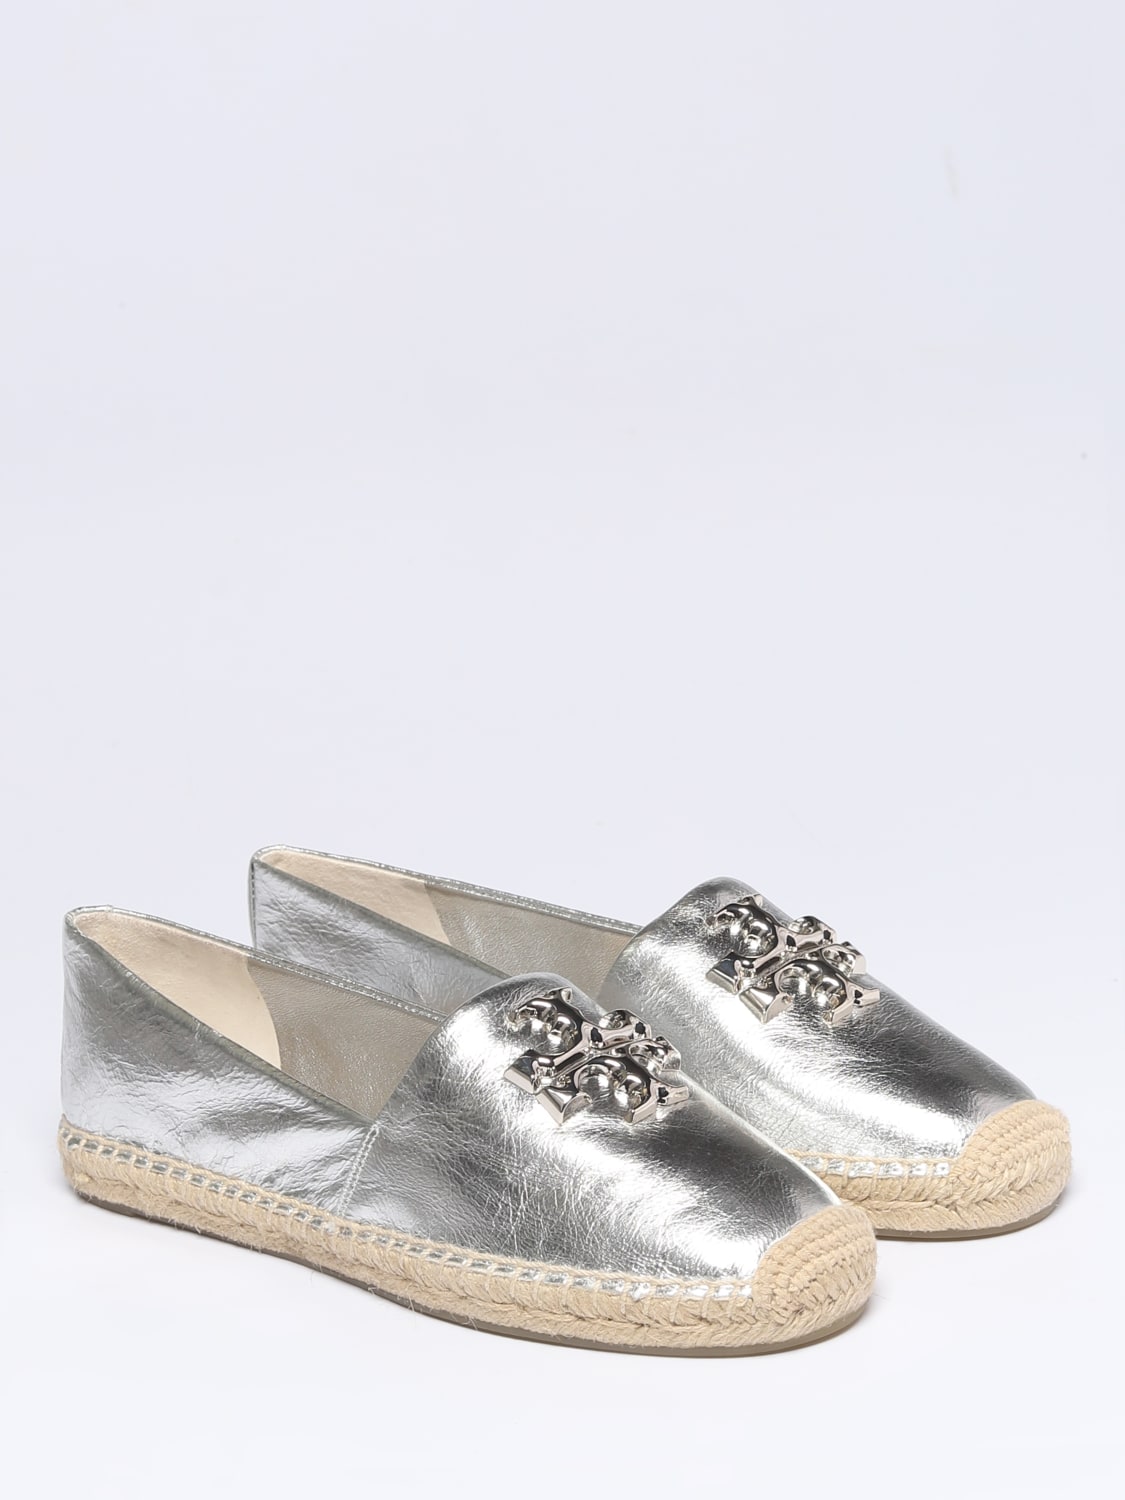 TORY espadrilles for woman - Silver | Tory Burch espadrilles 144163 online GIGLIO.COM